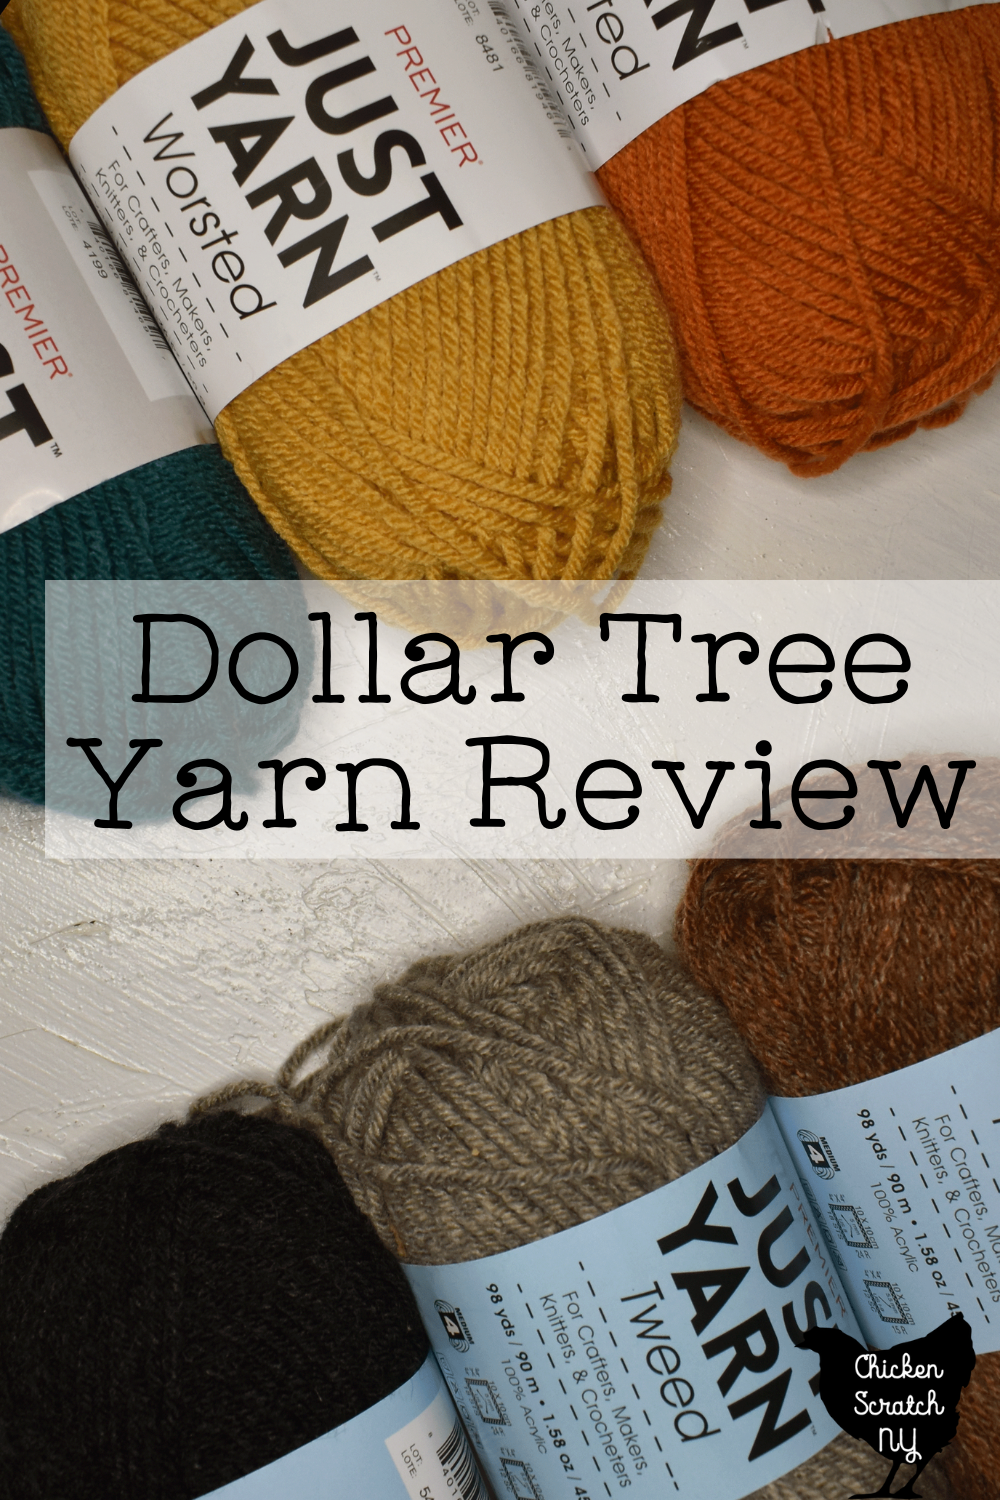 Premier Worsted Cotton Blend Puzzle Yarn by Premier Yarns